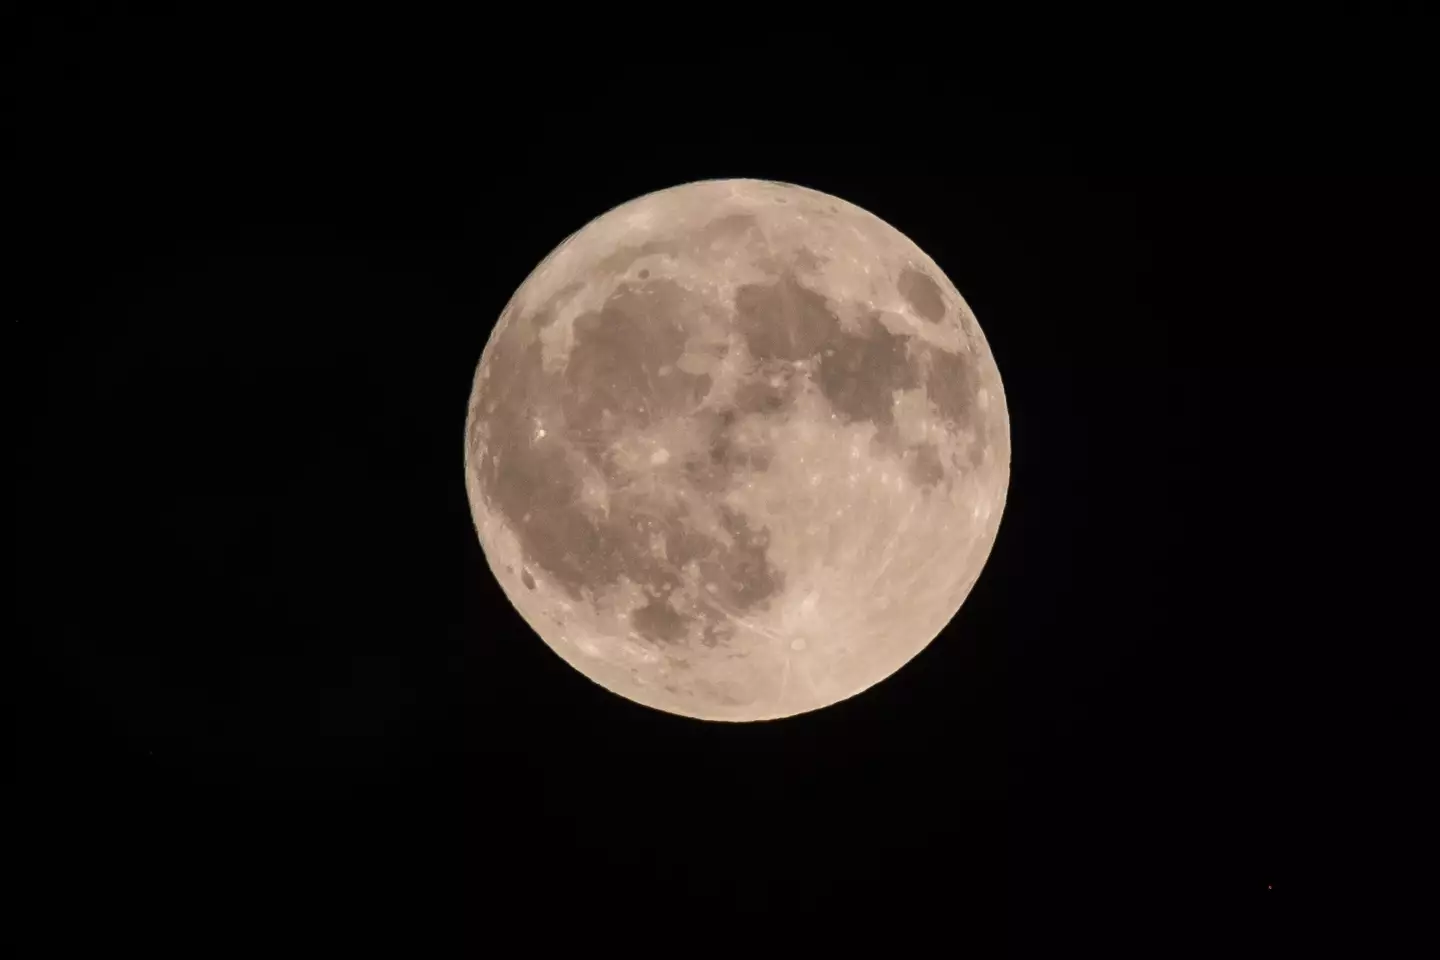 It'll be the first of four annual supermoons.